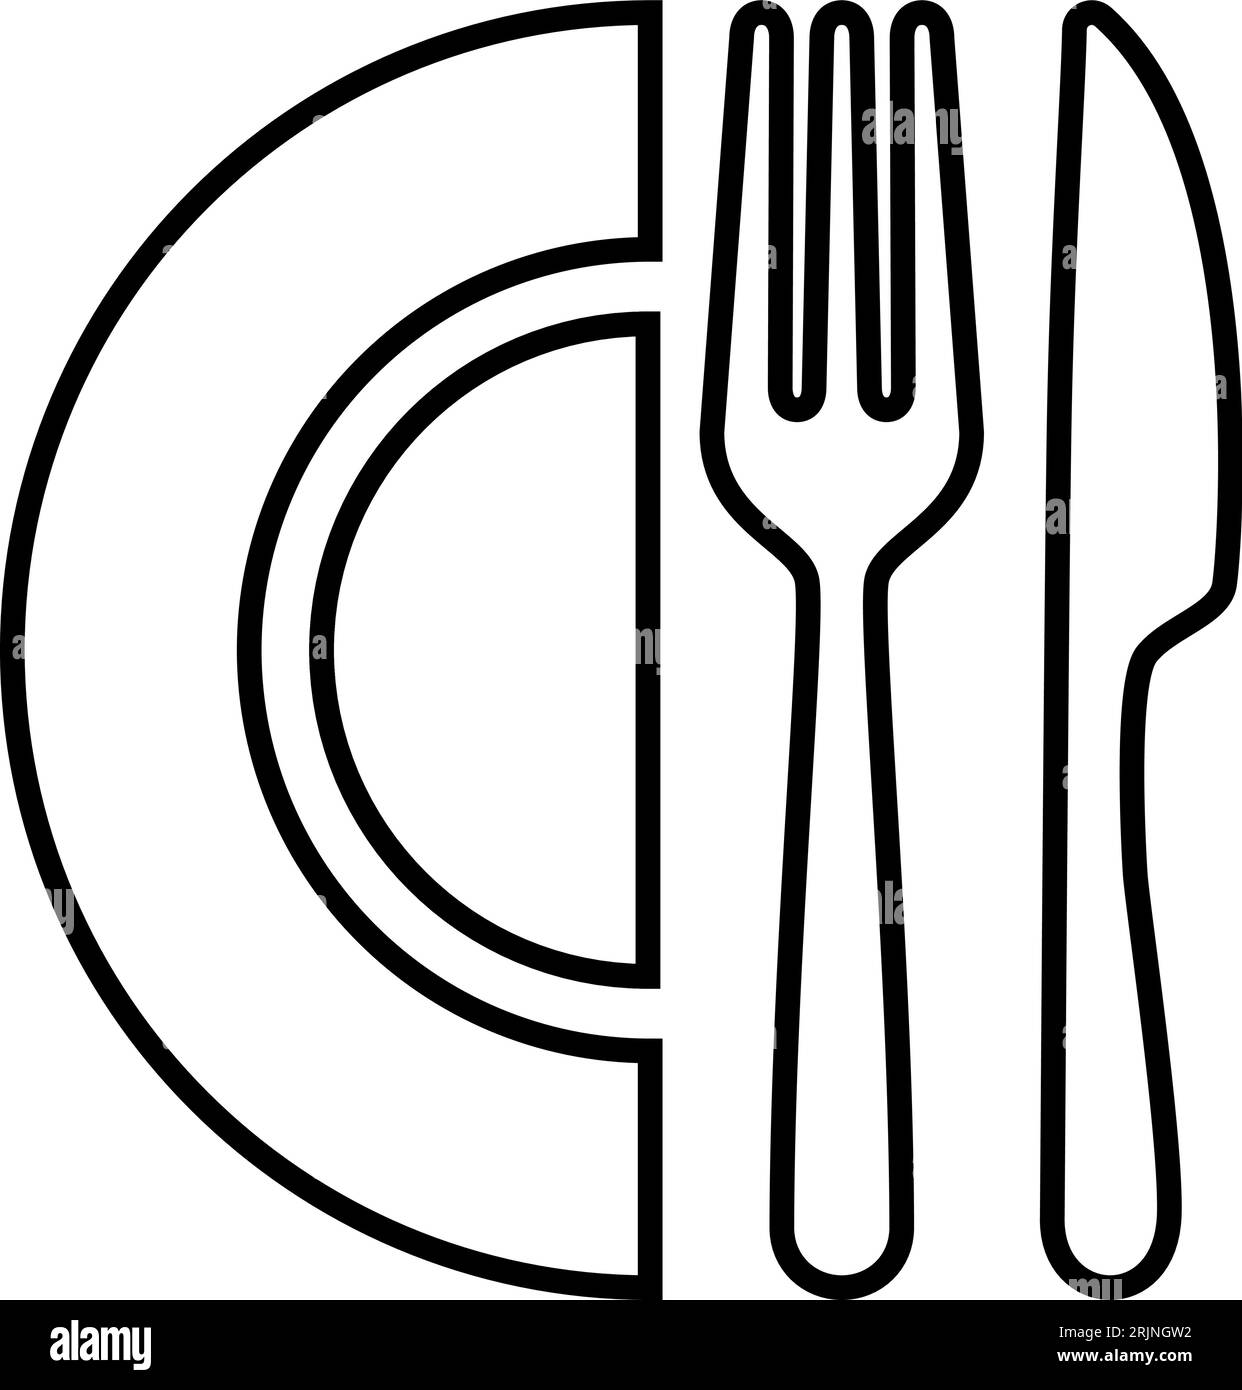 Cutlery line icon as concept of restaurant or cafe symbol for business lunch Stock Vector